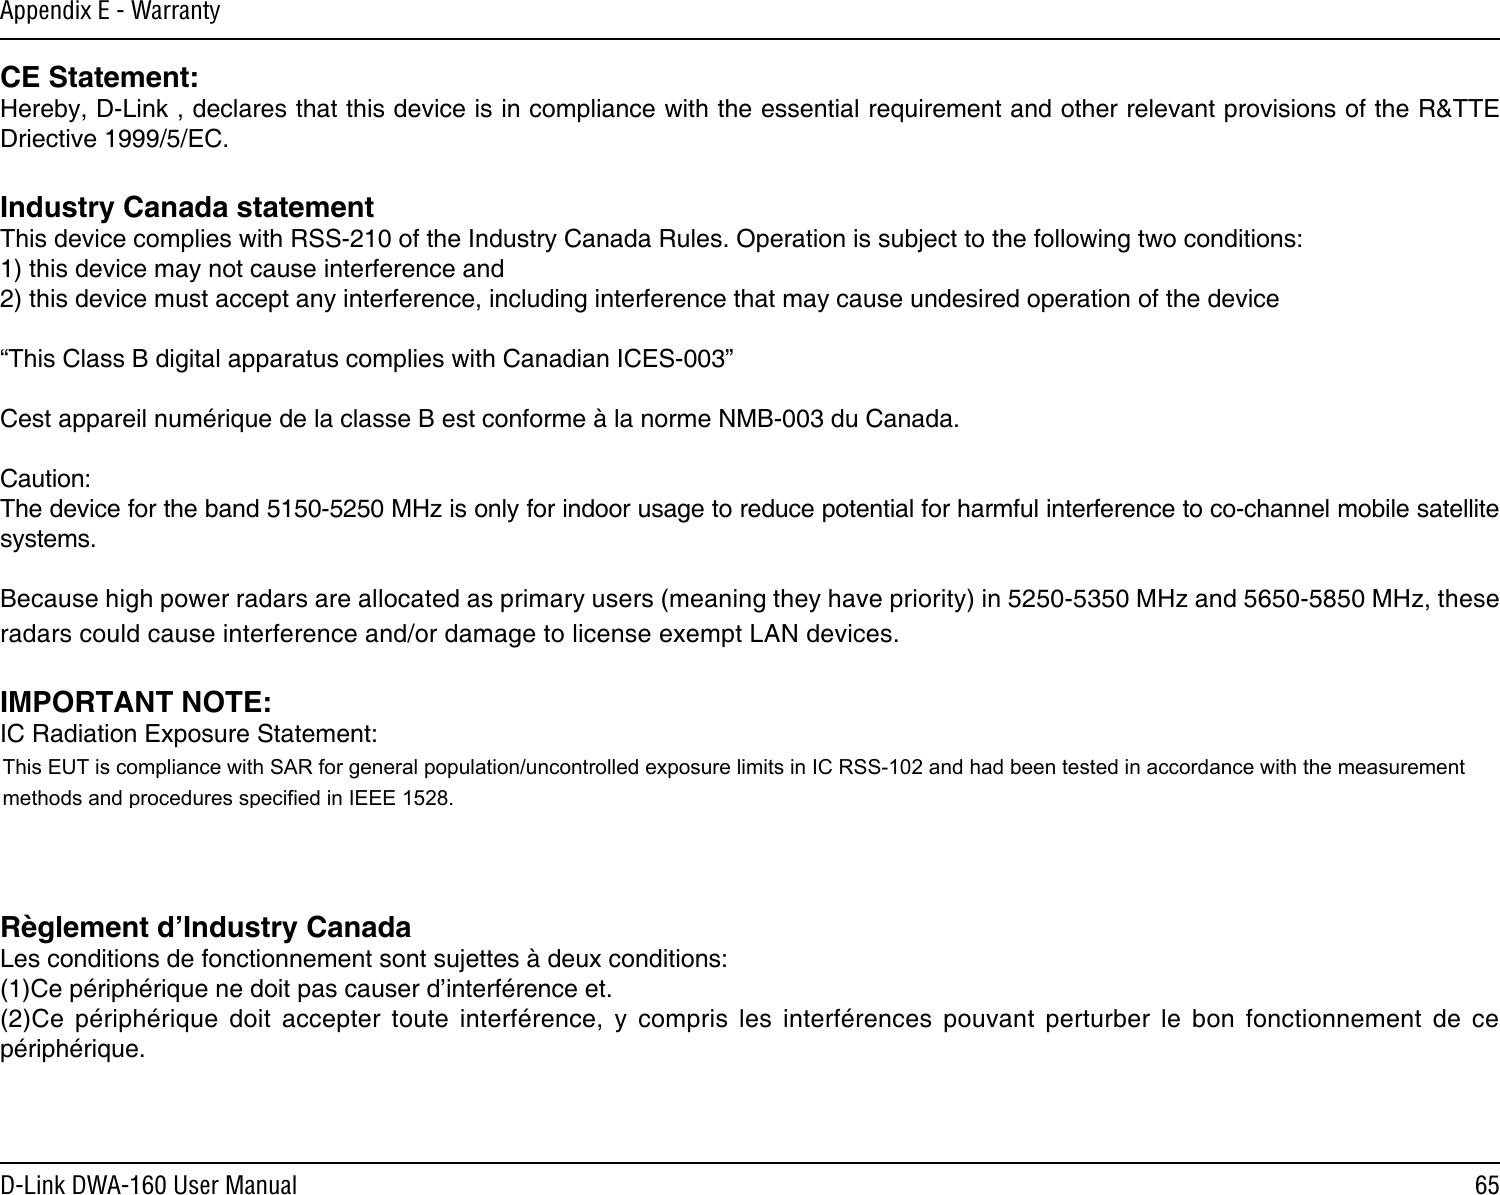 65D-Link DWA-160 User ManualAppendix E - WarrantyCE Statement:Hereby, D-Link , declares that this device is in compliance with the essential requirement and other relevant provisions of the R&amp;TTE Driective 1999/5/EC.Industry Canada statementThis device complies with RSS-210 of the Industry Canada Rules. Operation is subject to the following two conditions:1) this device may not cause interference and2) this device must accept any interference, including interference that may cause undesired operation of the device“This Class B digital apparatus complies with Canadian ICES-003”Cest appareil numérique de la classe B est conforme à la norme NMB-003 du Canada.Caution:The device for the band 5150-5250 MHz is only for indoor usage to reduce potential for harmful interference to co-channel mobile satellite systems.Because high power radars are allocated as primary users (meaning they have priority) in 5250-5350 MHz and 5650-5850 MHz, these radars could cause interference and/or damage to license exempt LAN devices.IMPORTANT NOTE:IC Radiation Exposure Statement:This equipment complies with IC radiation exposure limits set forth for an uncontrolled environment. End users must follow the specic operating instructions for satisfying RF exposure compliance. This equipment should be installed and operated with minimum distance 20cm between the radiator and your body. To maintain compliance with IC RF exposure compliance requirements, please follow operation instruction as documented in this manual.Règlement d’Industry Canada Les conditions de fonctionnement sont sujettes à deux conditions: (1)Ce périphérique ne doit pas causer d’interférence et. (2)Ce  périphérique  doit  accepter  toute  interférence,  y  compris  les  interférences  pouvant  perturber  le  bon  fonctionnement  de  ce périphérique.This EUT is compliance with SAR for general population/uncontrolled exposure limits in IC RSS-102 and had been tested in accordance with the measurementmethods and procedures specified in IEEE 1528.